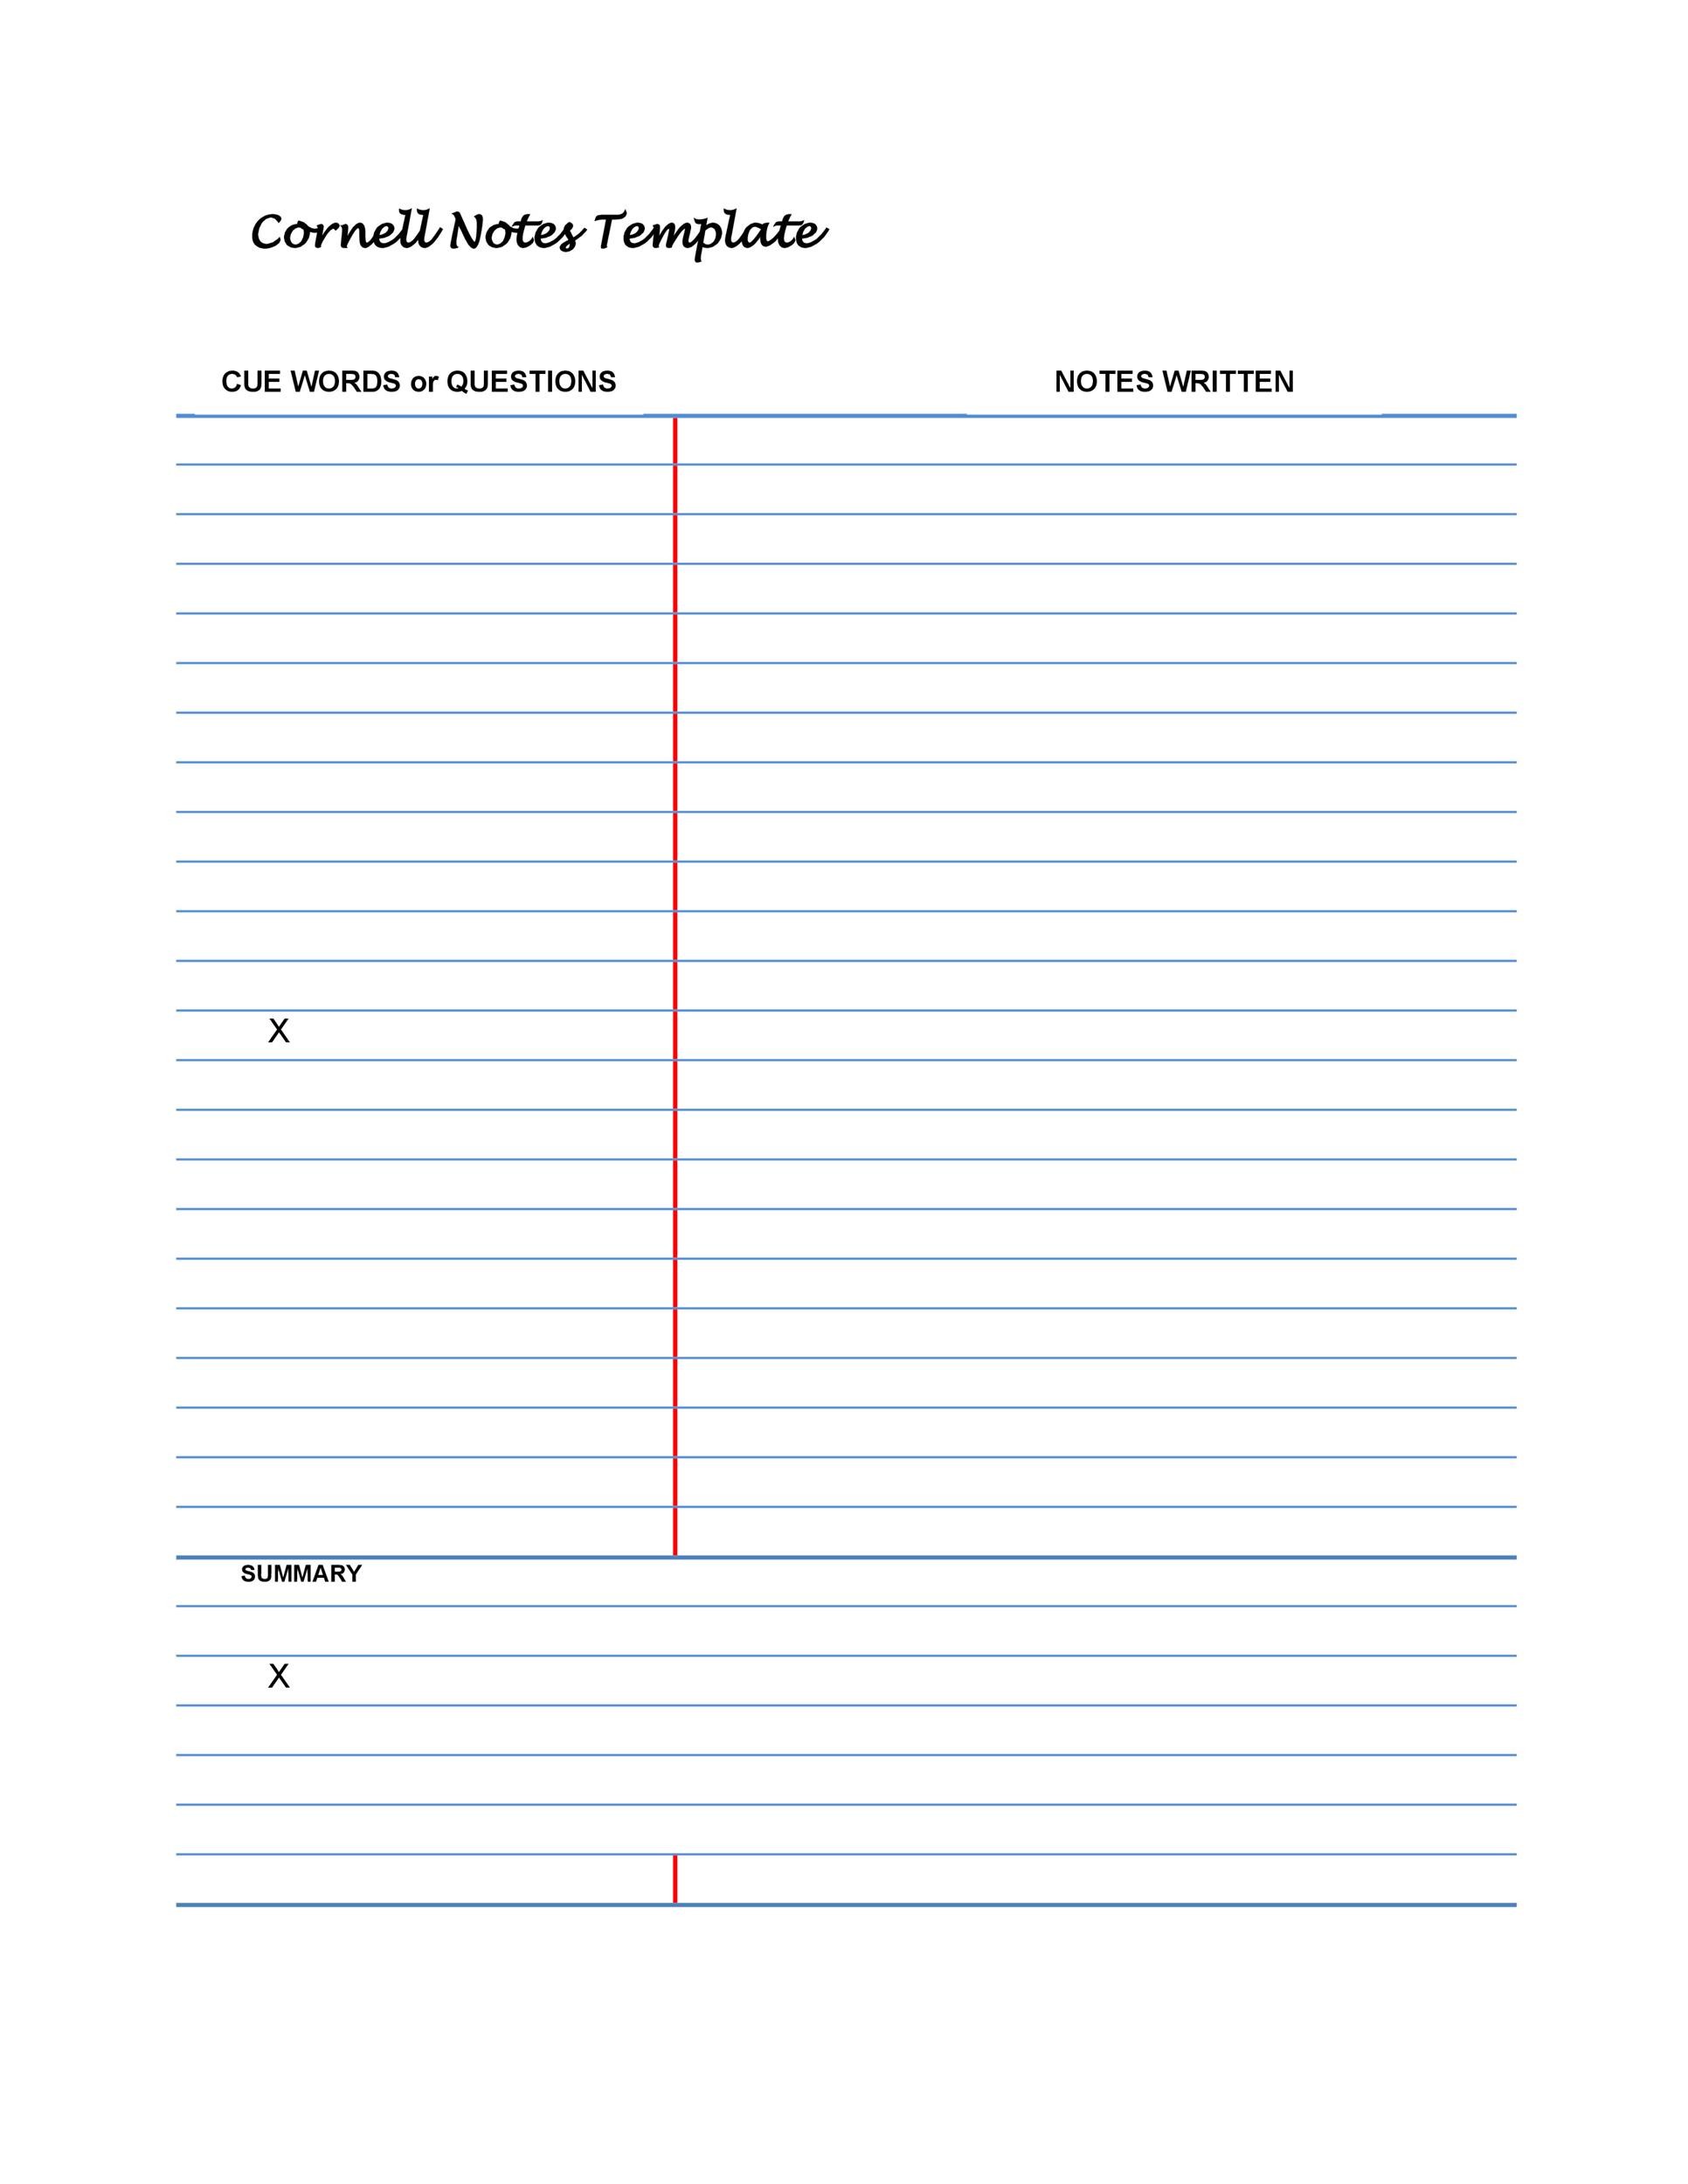 36 Cornell Notes Templates Examples Word PDF ᐅ TemplateLab